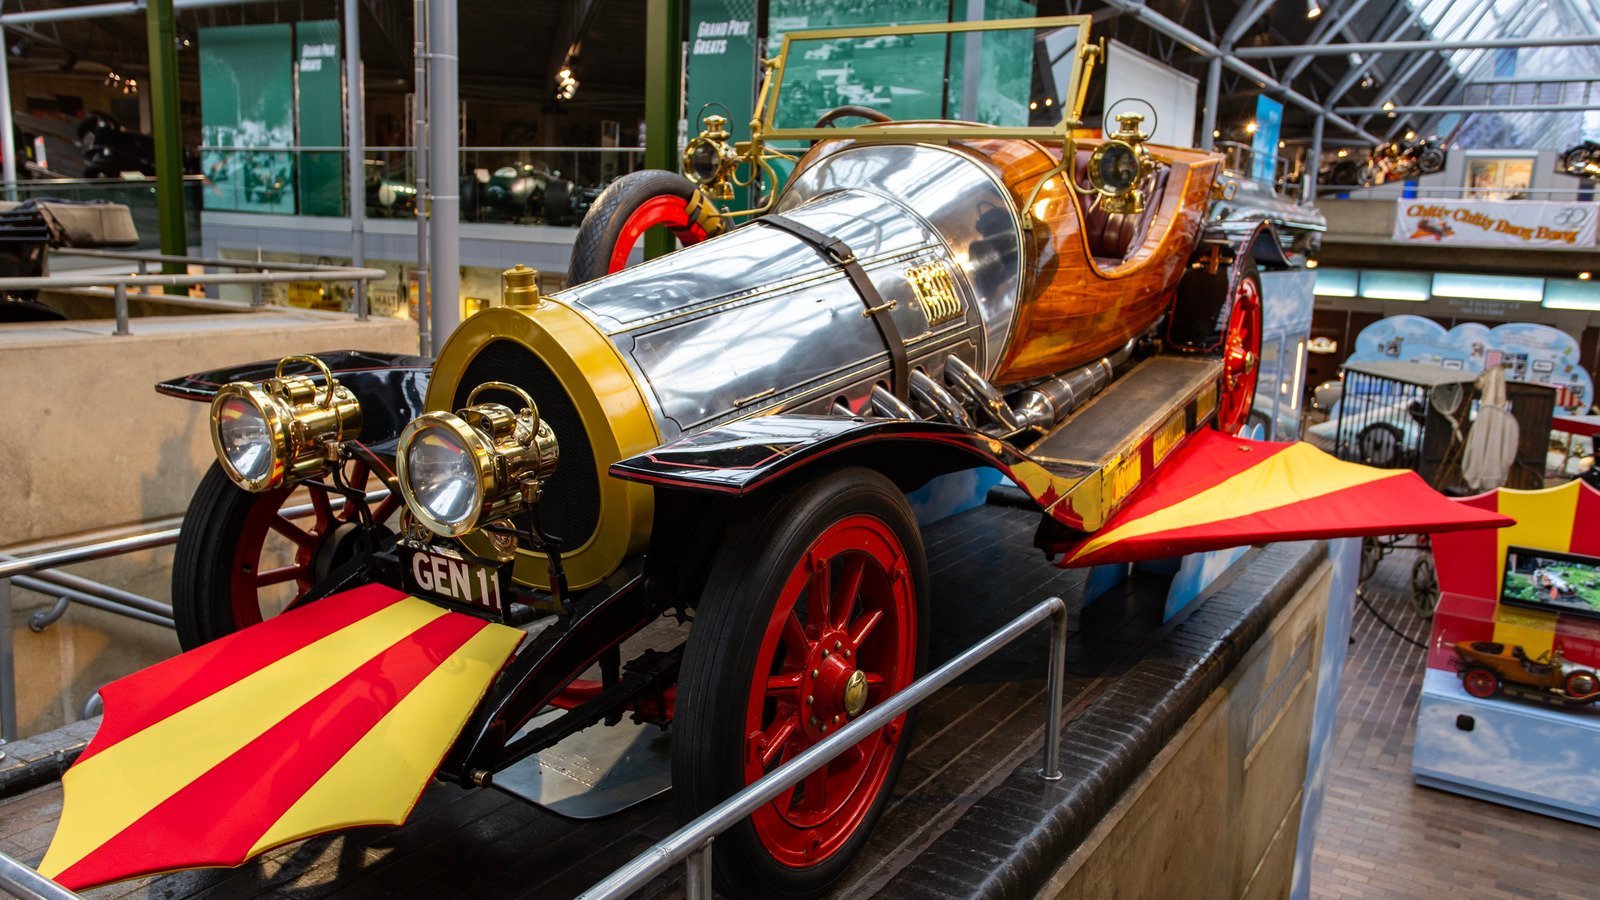 Whatever Happened To The One-Of-A-Kind Car From Chitty Chitty Bang Bang?